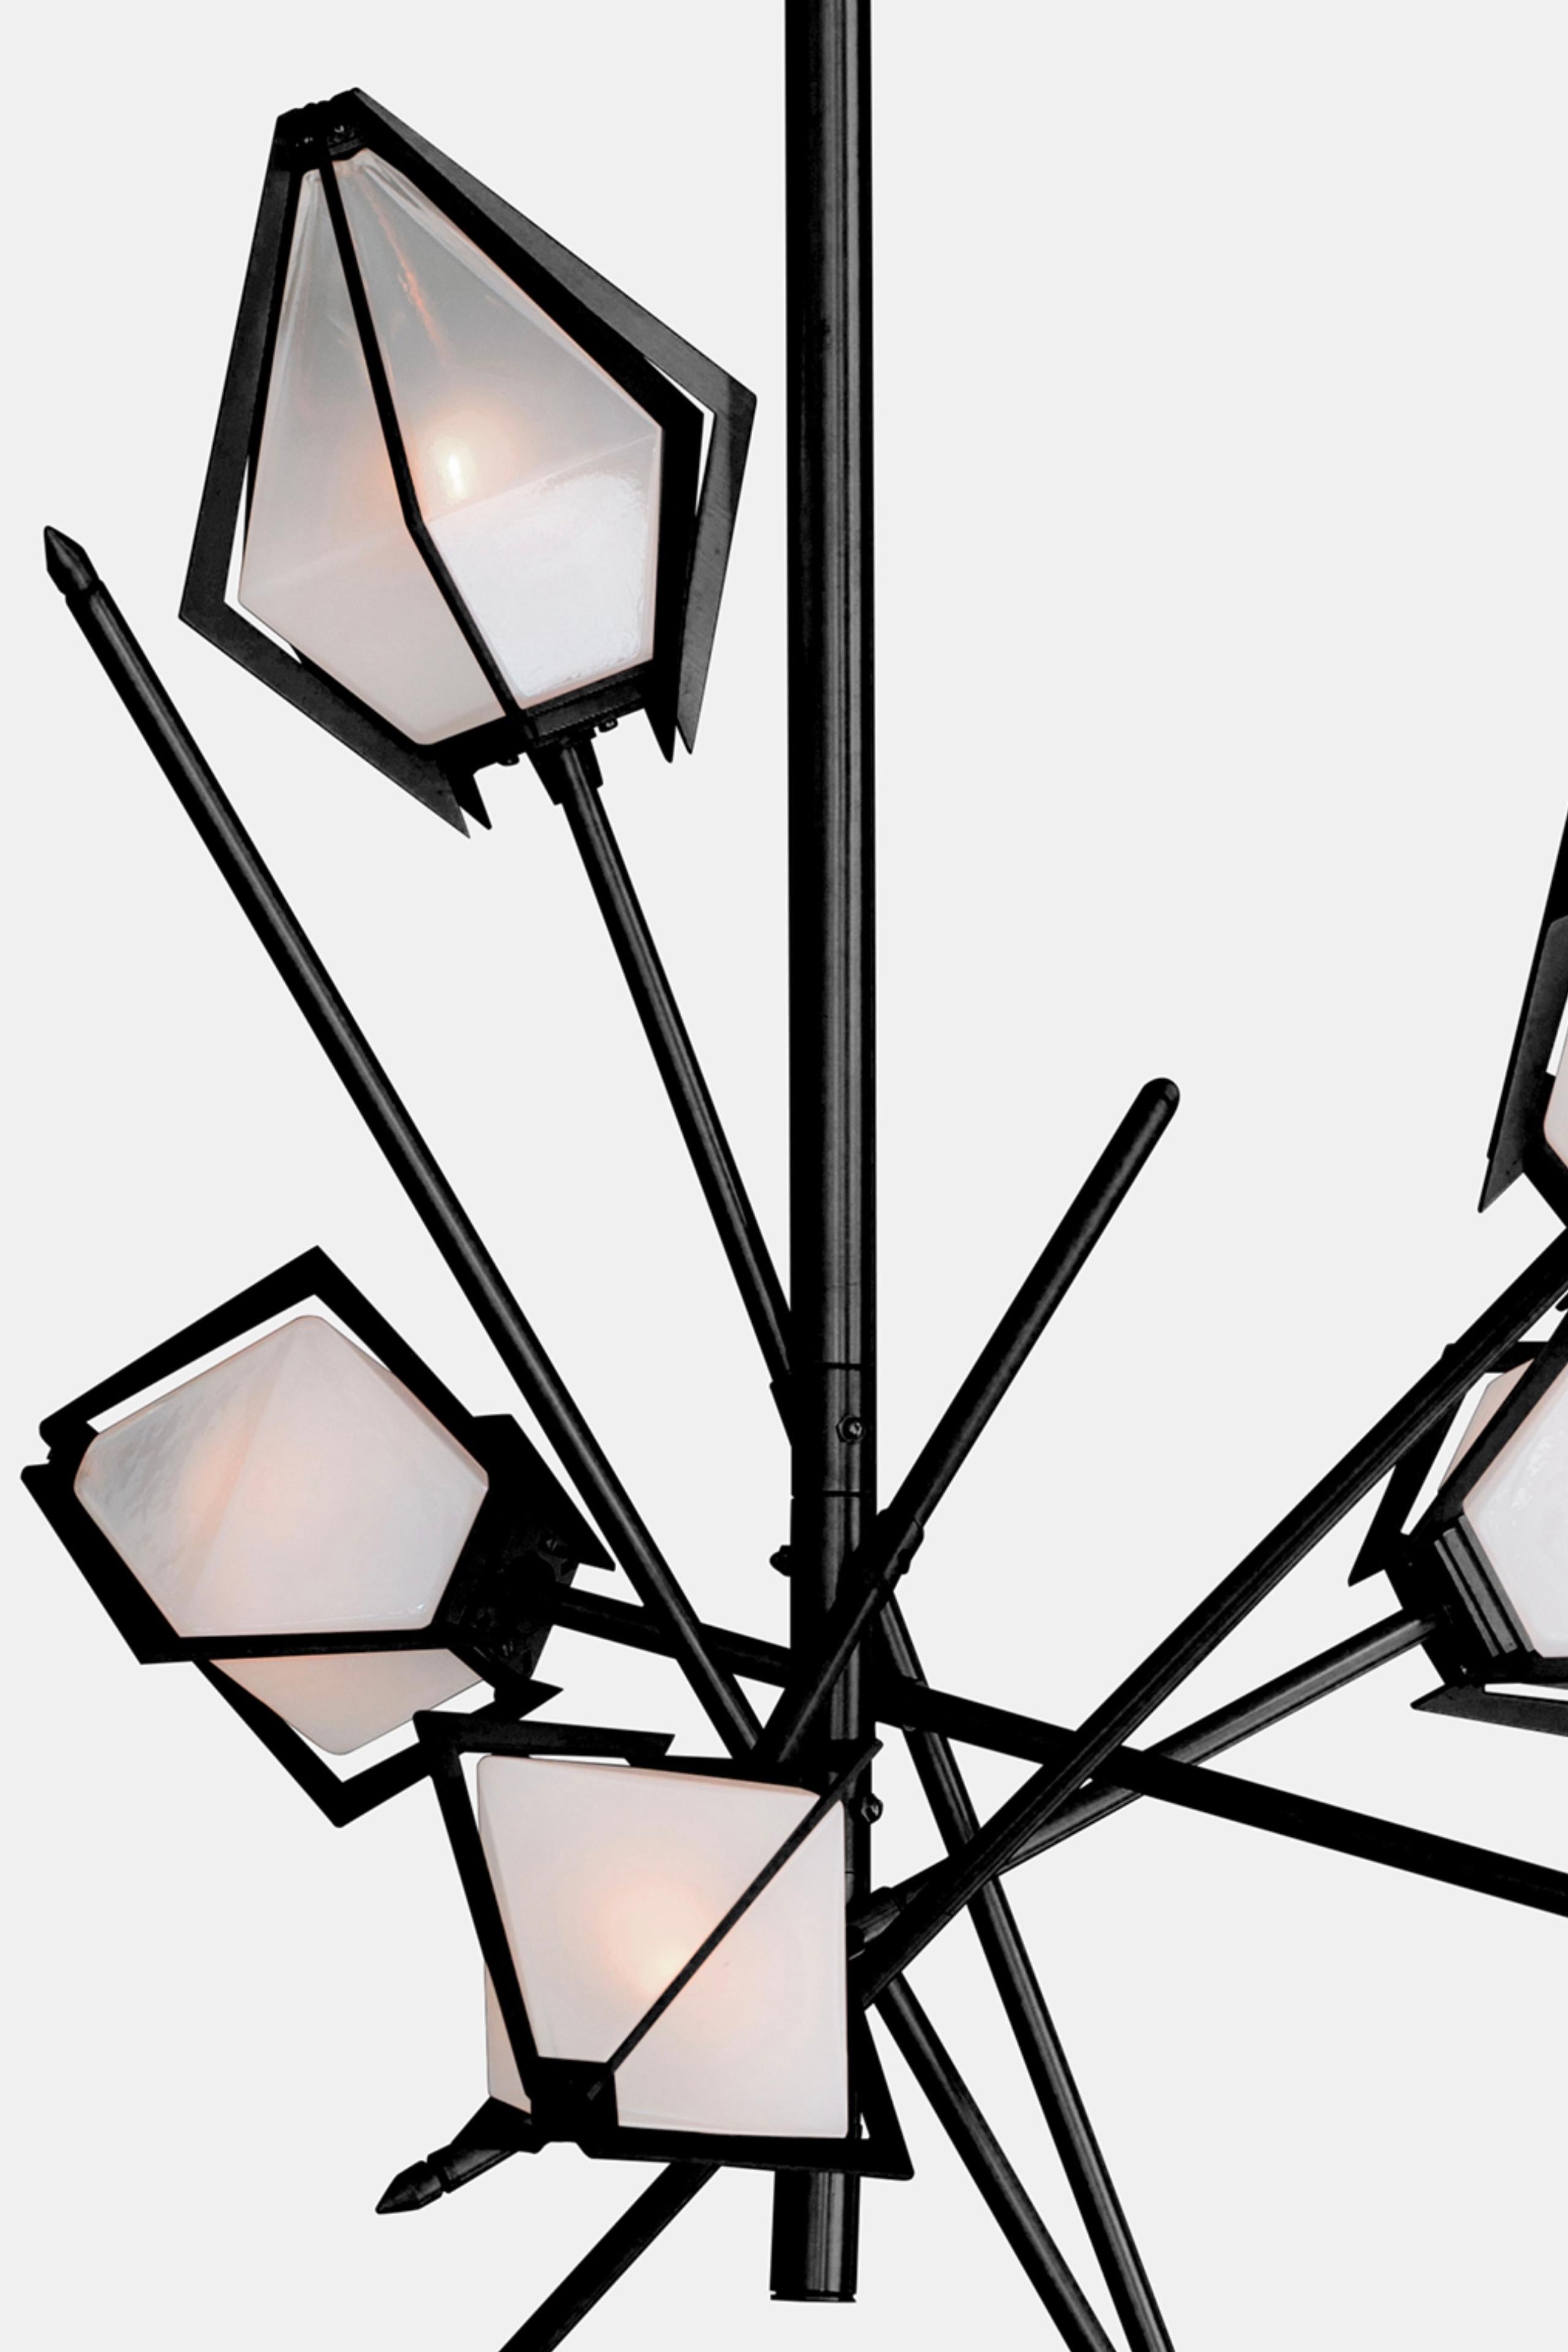 The Harlow Small Chandelier offers an elegant starburst of light that reflects and refracts through its mold-blown glass shade. A sparkling prism, the Harlow Small Chandelier is directly inspired by the world of jewelry with its metallic frame